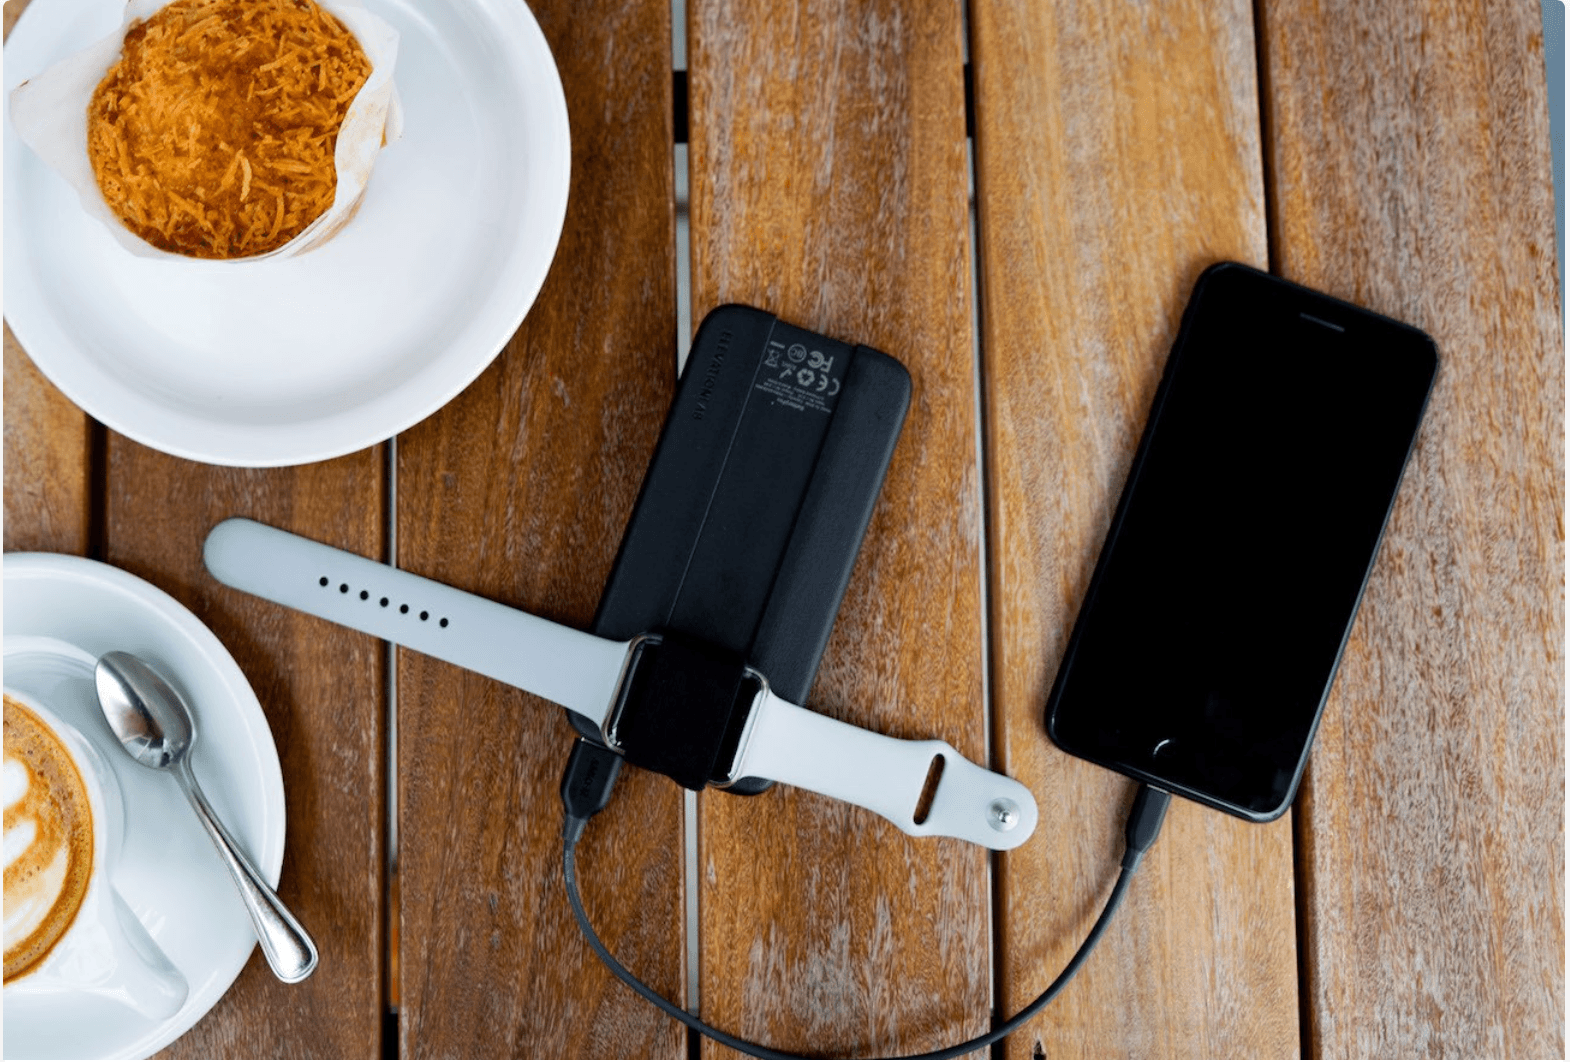 The Best iPhone Accessories to Take Your iPhone Use to the Next Level